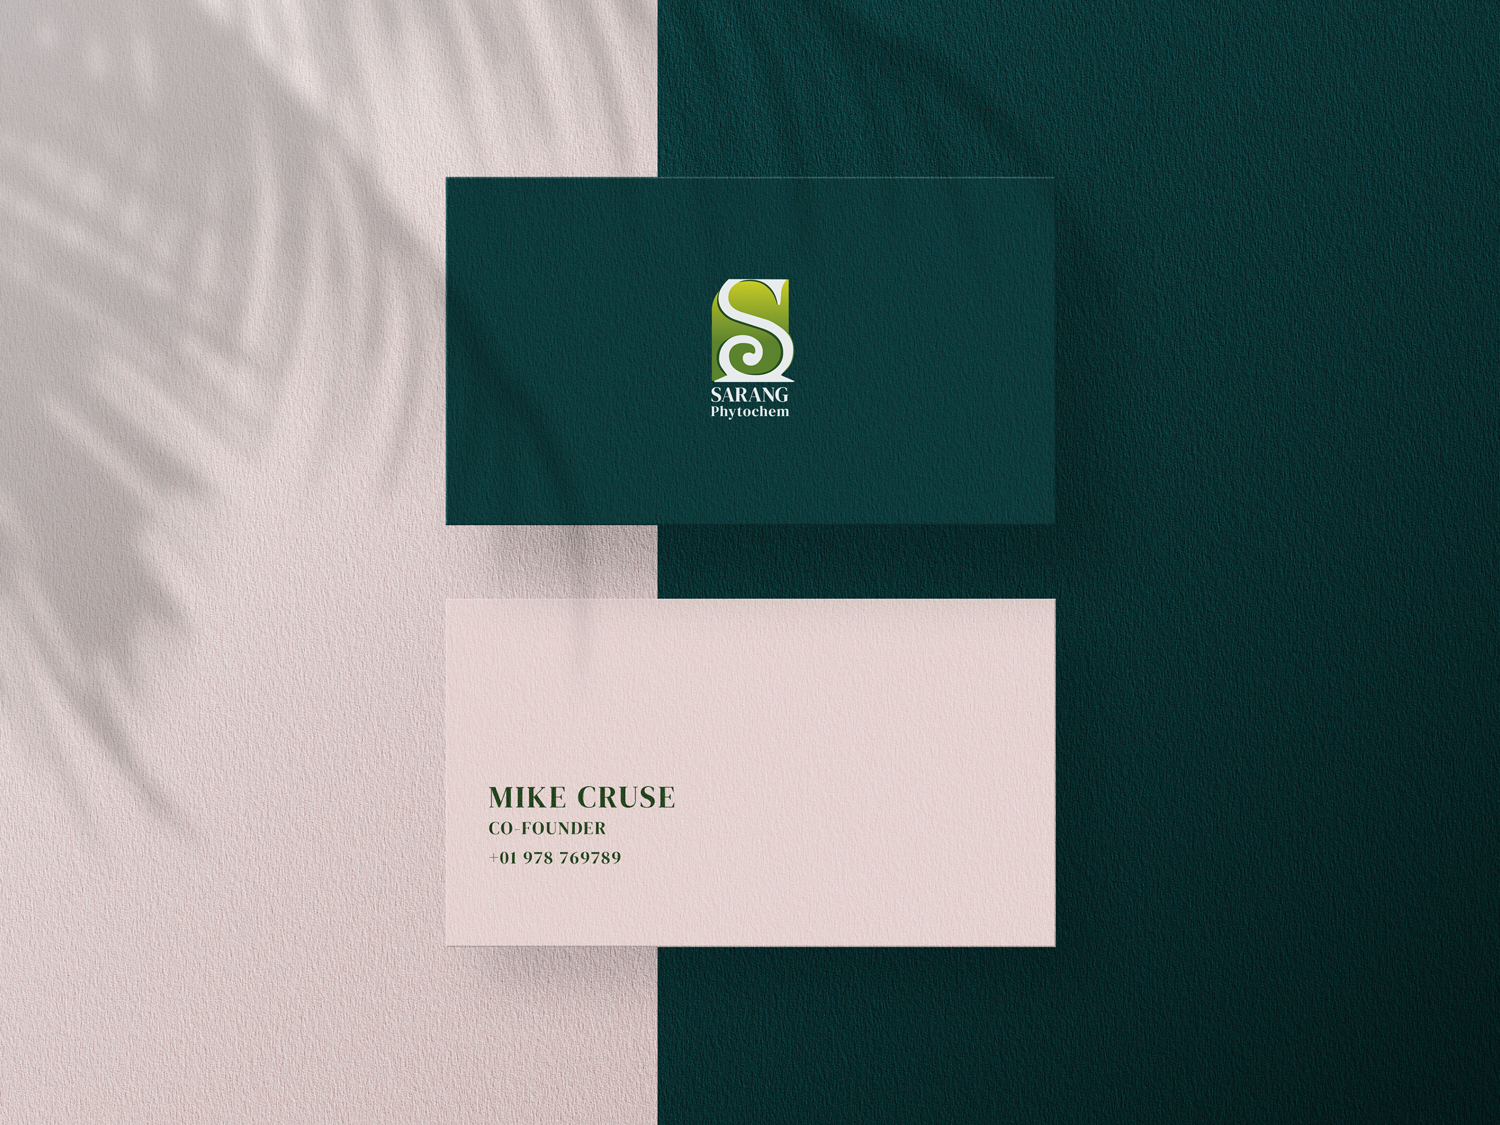 Imajine's designed Business card for international herbal products